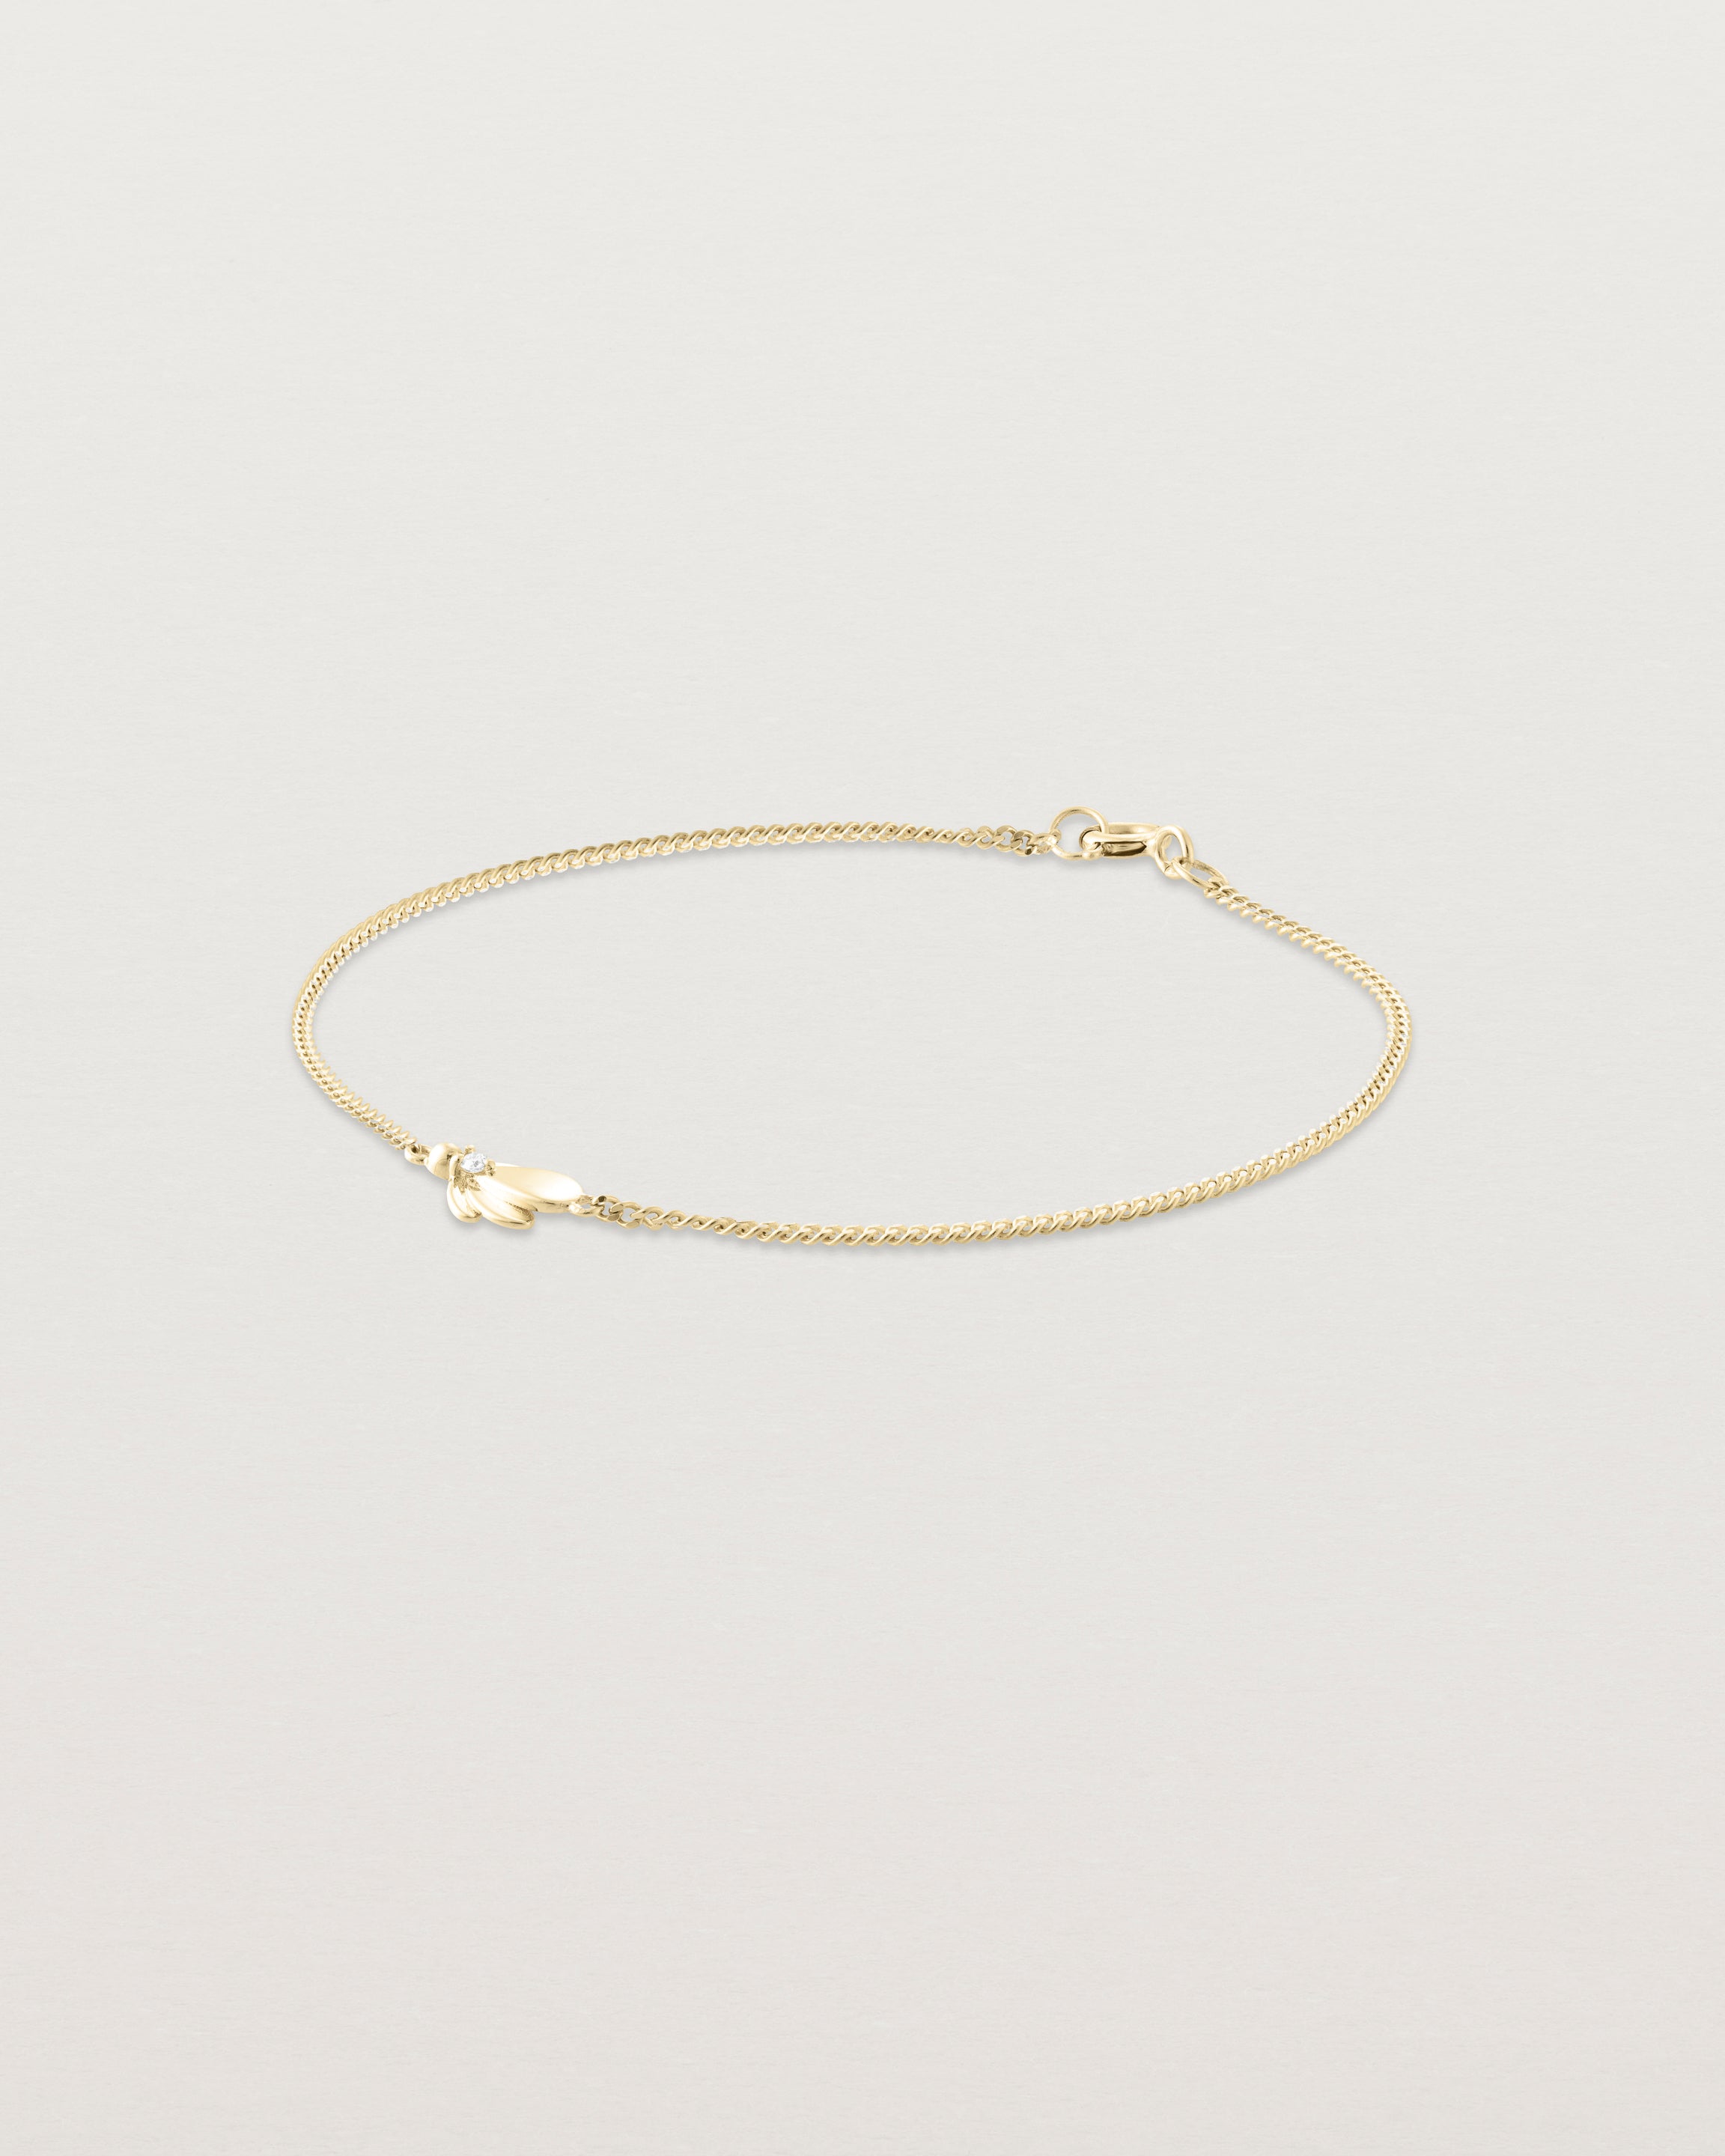 Angled view of the Aeris Bracelet | Diamond in yellow gold.